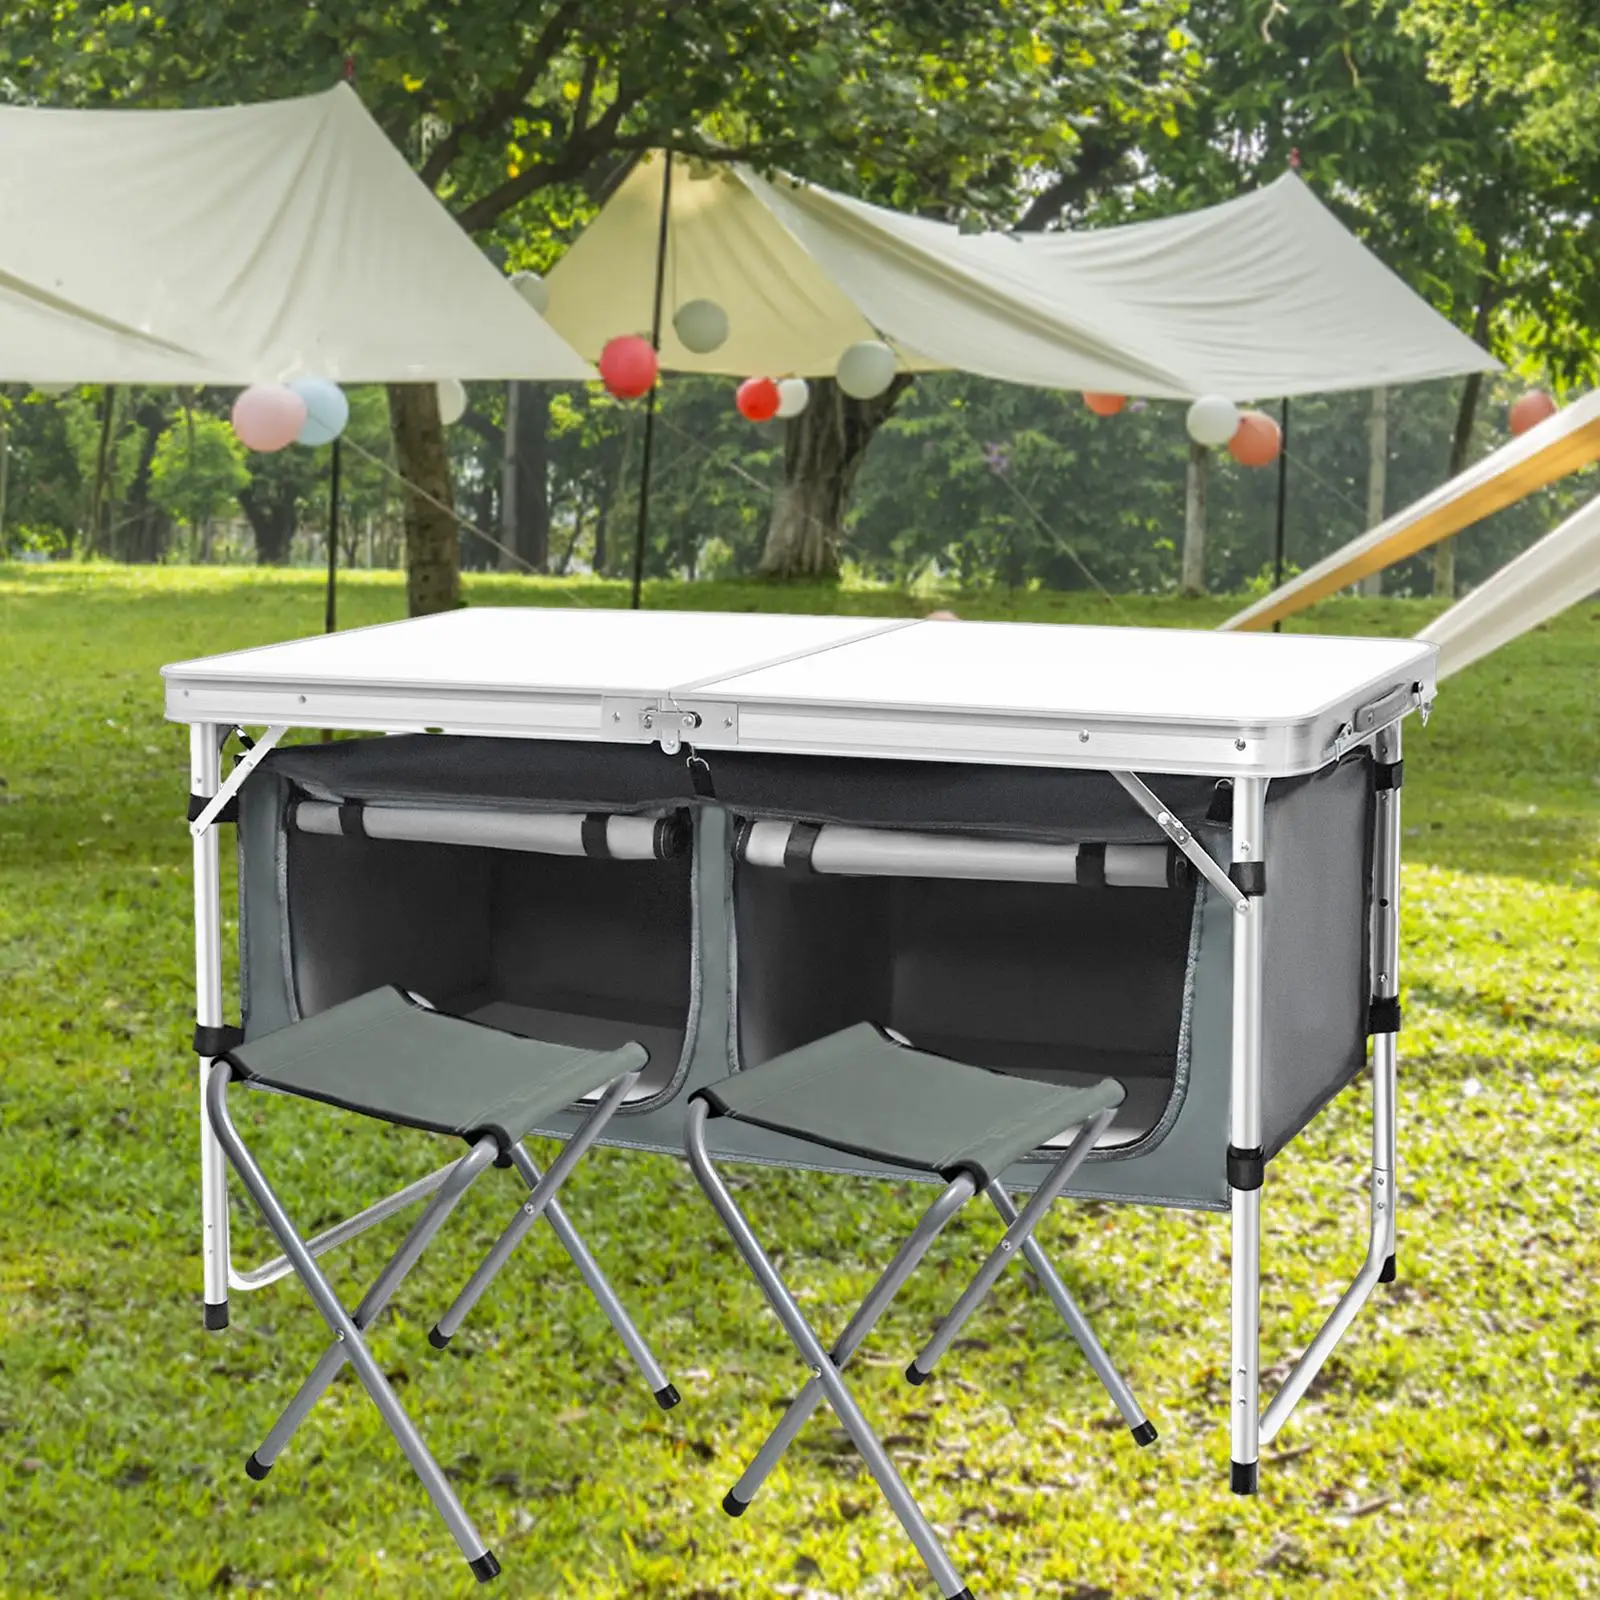 Camping Table with Chairs Aluminum Alloy Waterproof 4 Foot Portable Aluminum Folding Table for Beach Outdoor Picnic BBQ